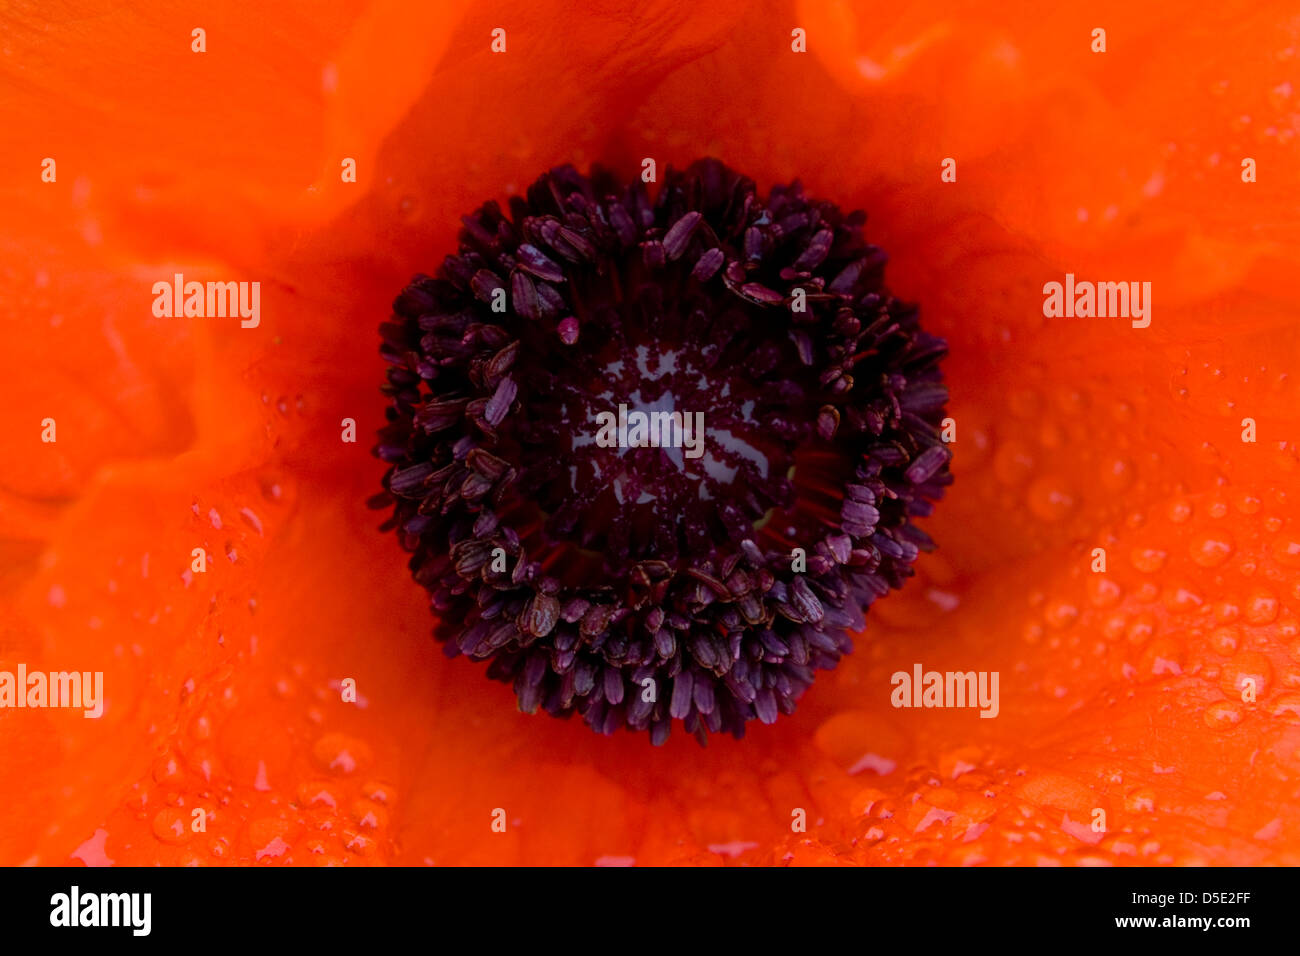 Common Poppy or Red Poppies (Papaver rhoeas) Stock Photo